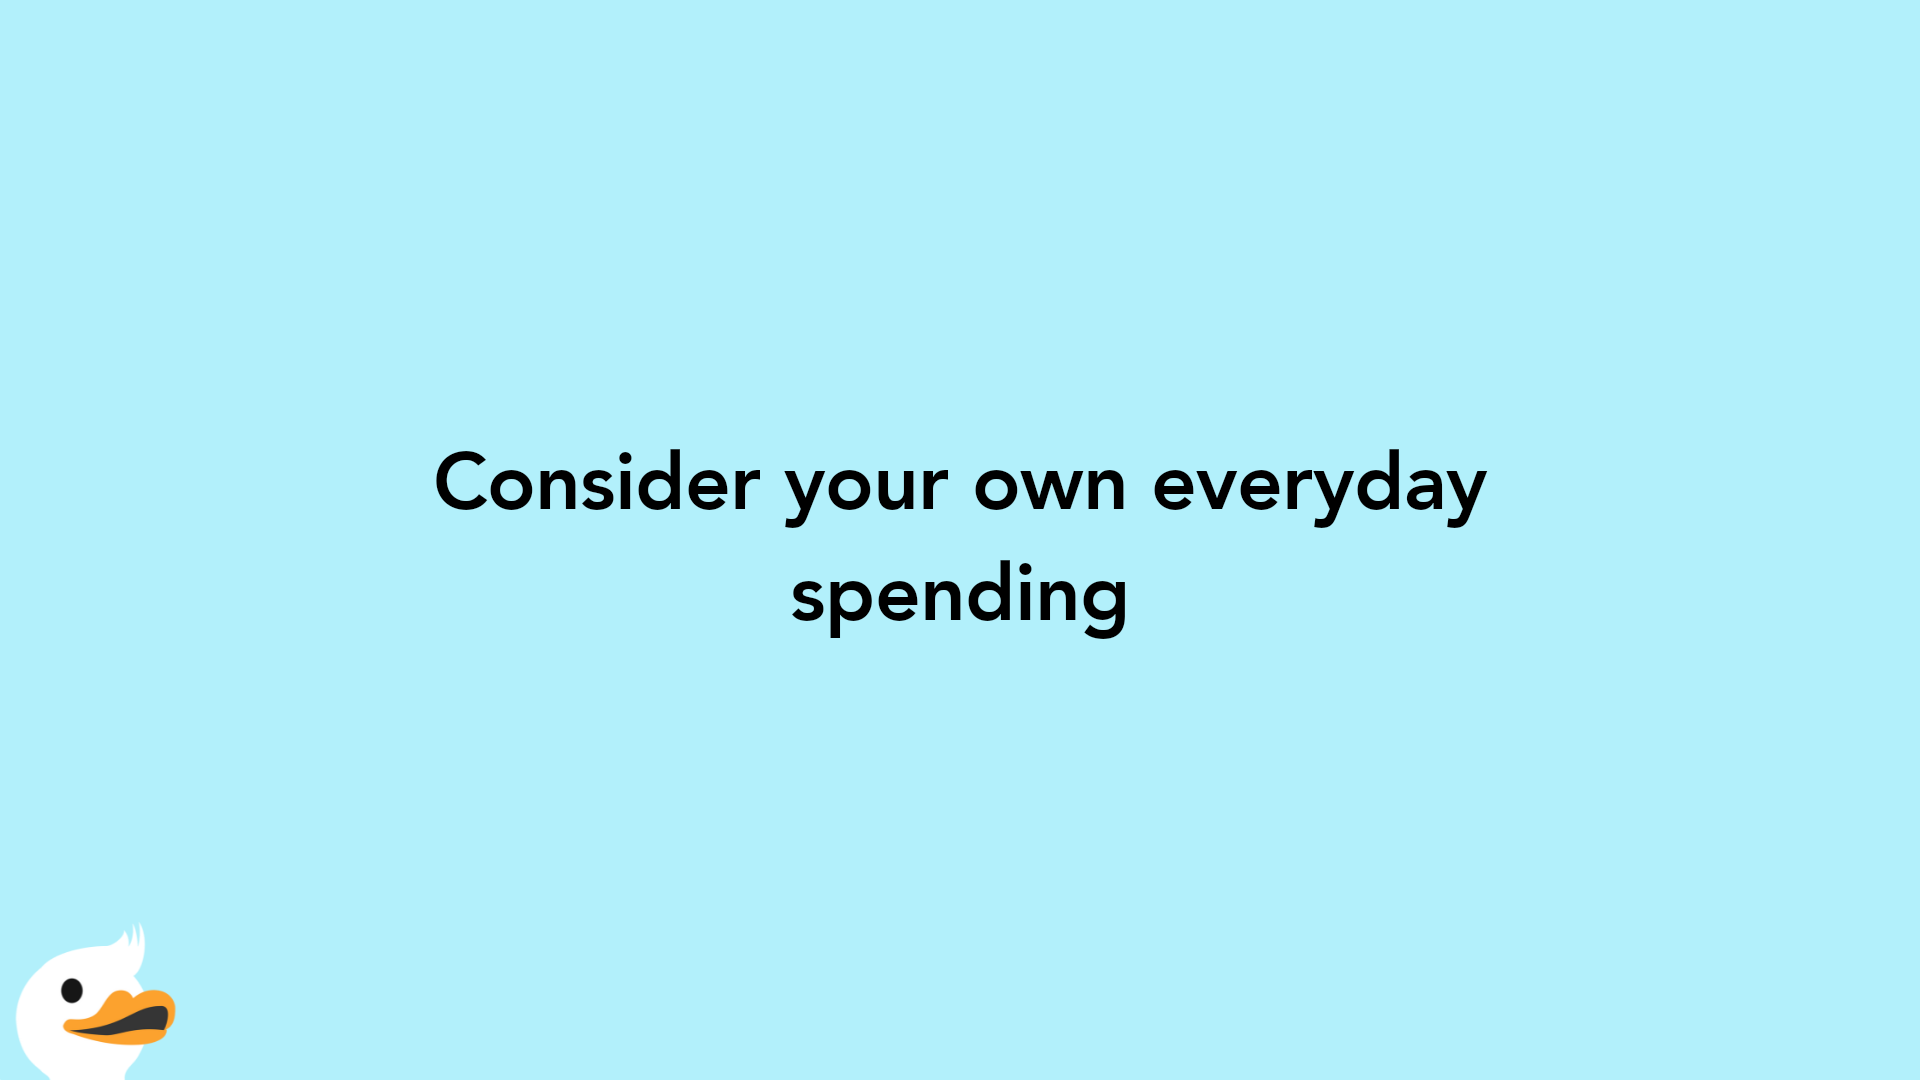 Consider your own everyday spending